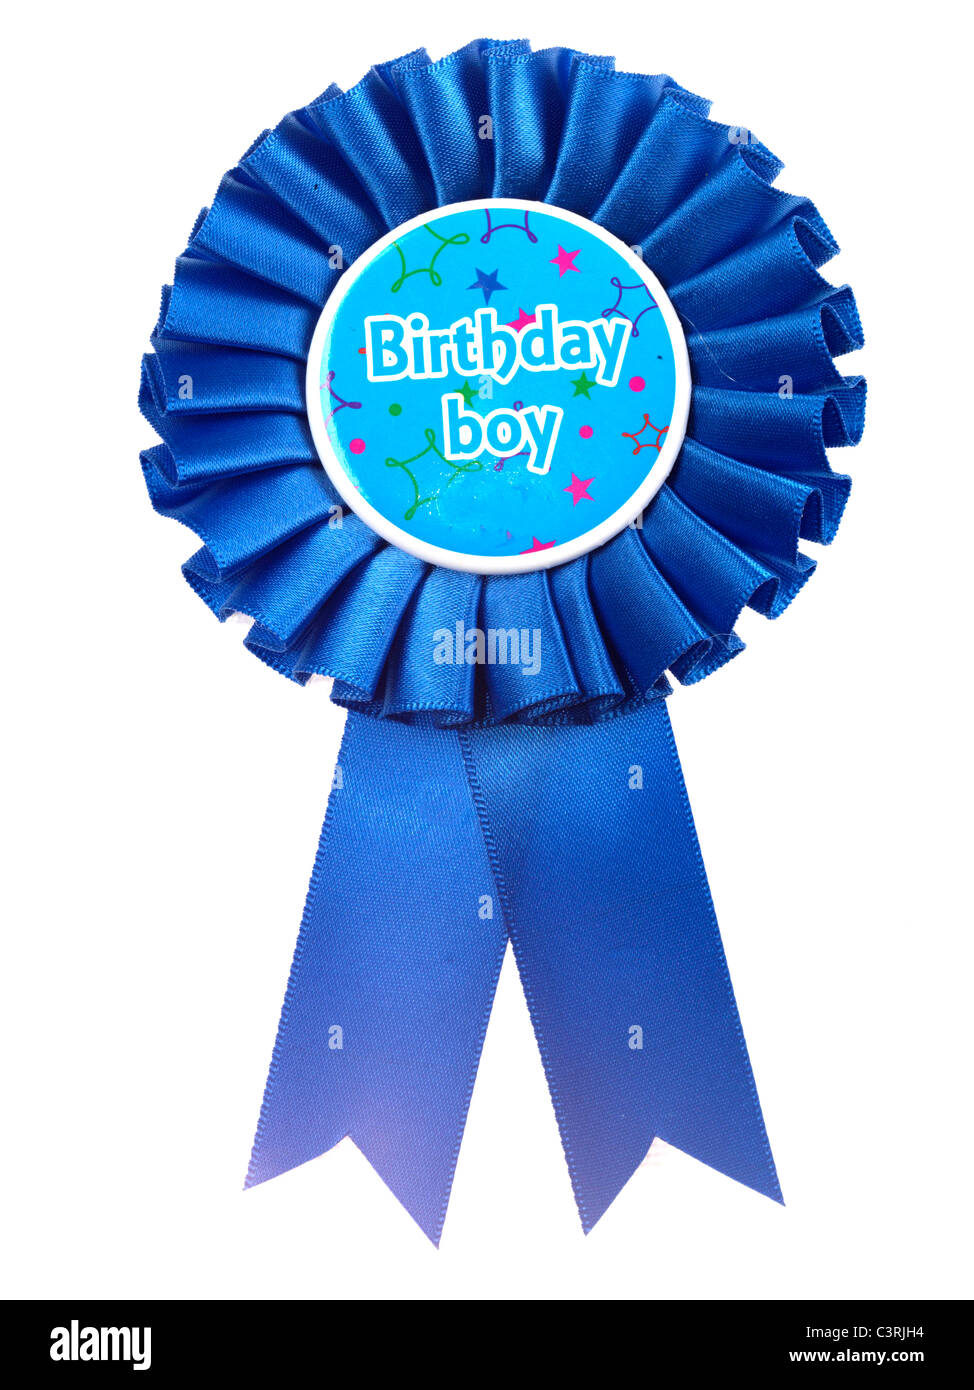 ITS MY BIRTHDAY 10 20 30 40 50 TODAY PERSONALISED AGE ROSETTE HAPPY BIRTHDAY 